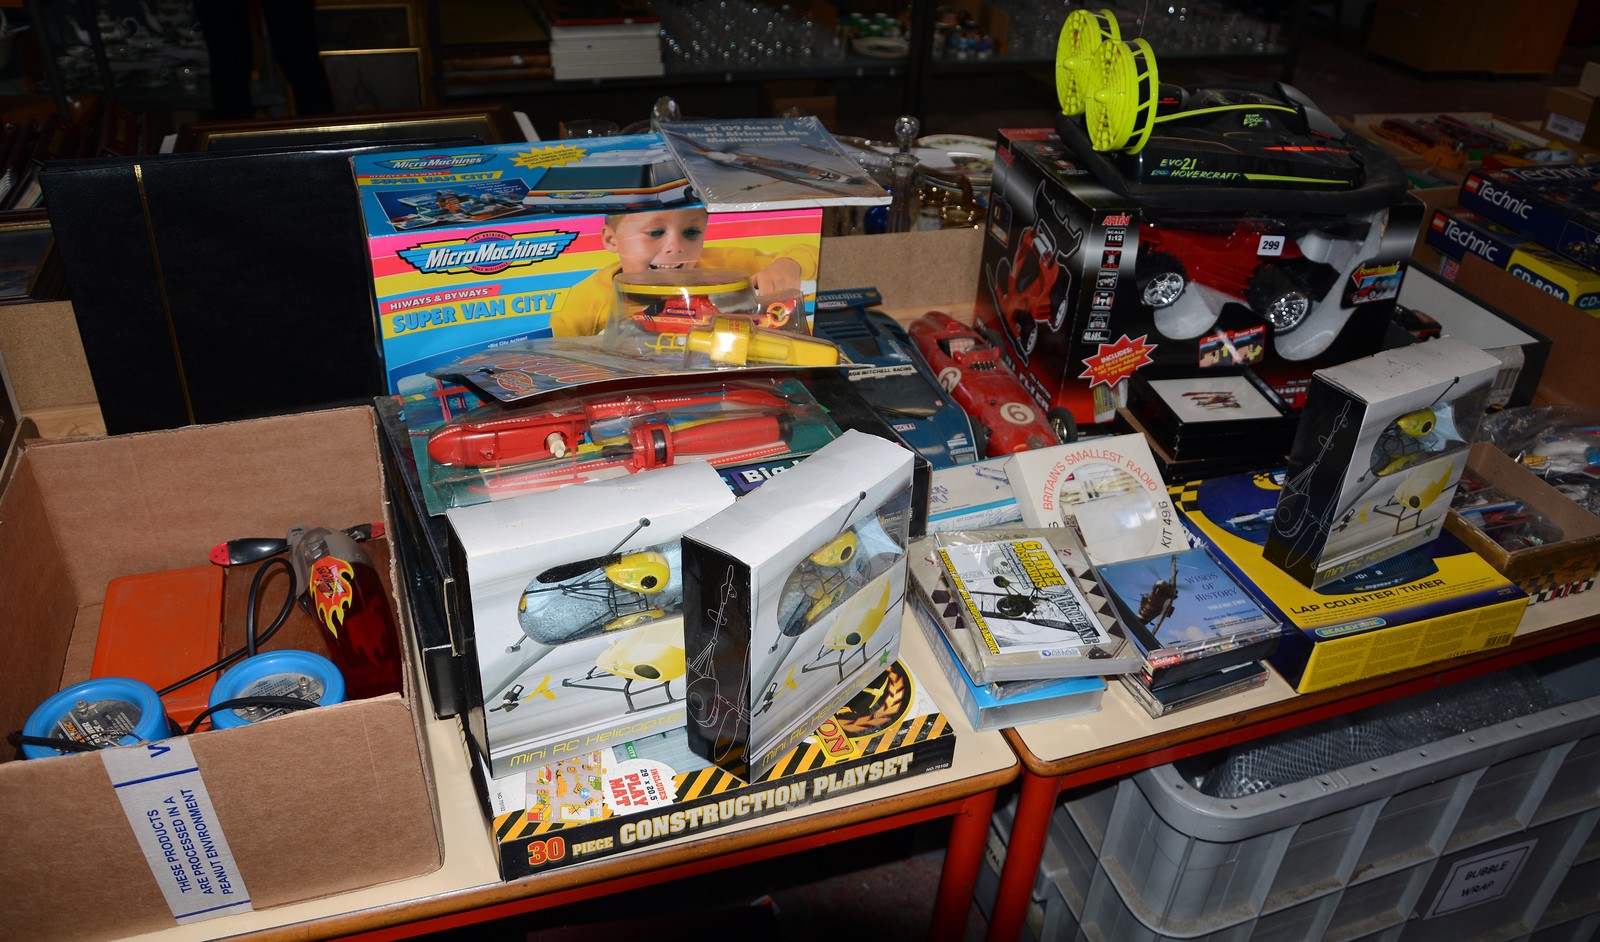 A quantity of die cast cars, boxed radio controlled car, Mini RC Helicopters, a hover craft etc. (as